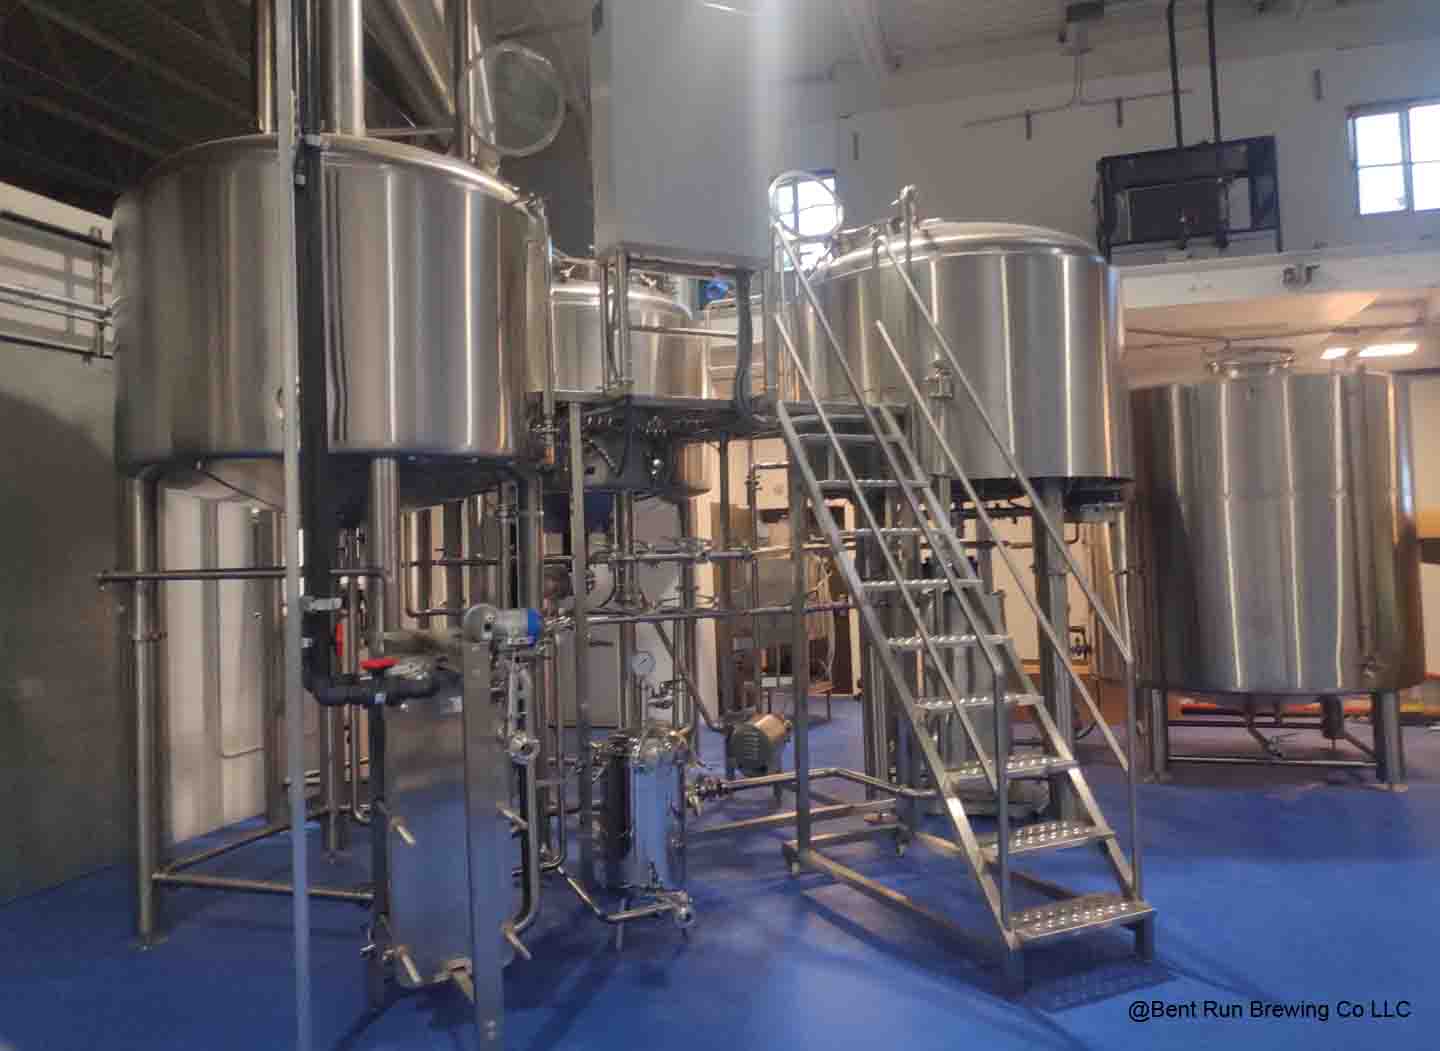 <b>What are some skills and experiences that will help you build a successful microbrewery</b>